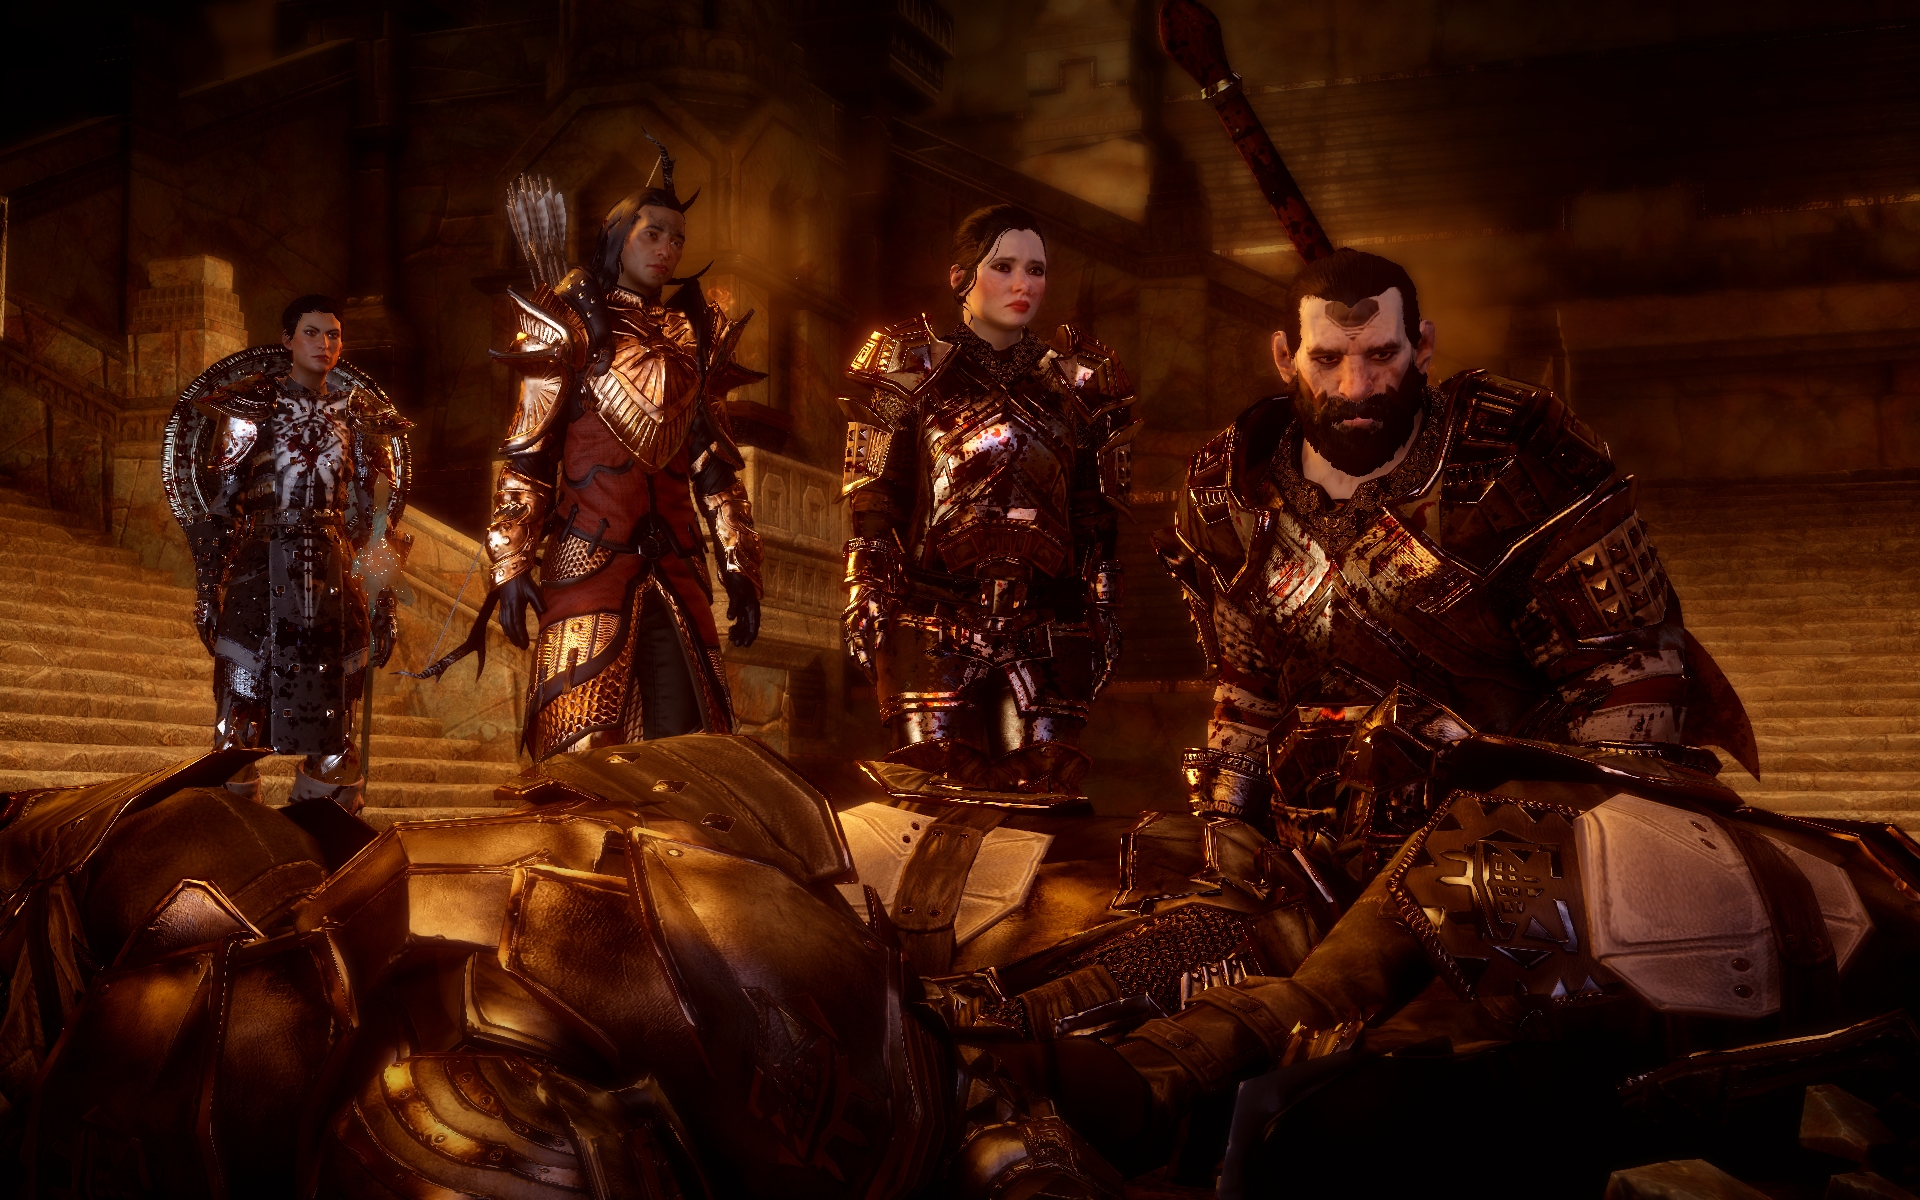 Dragon Age Inquisition: Jaws of Hakkon review